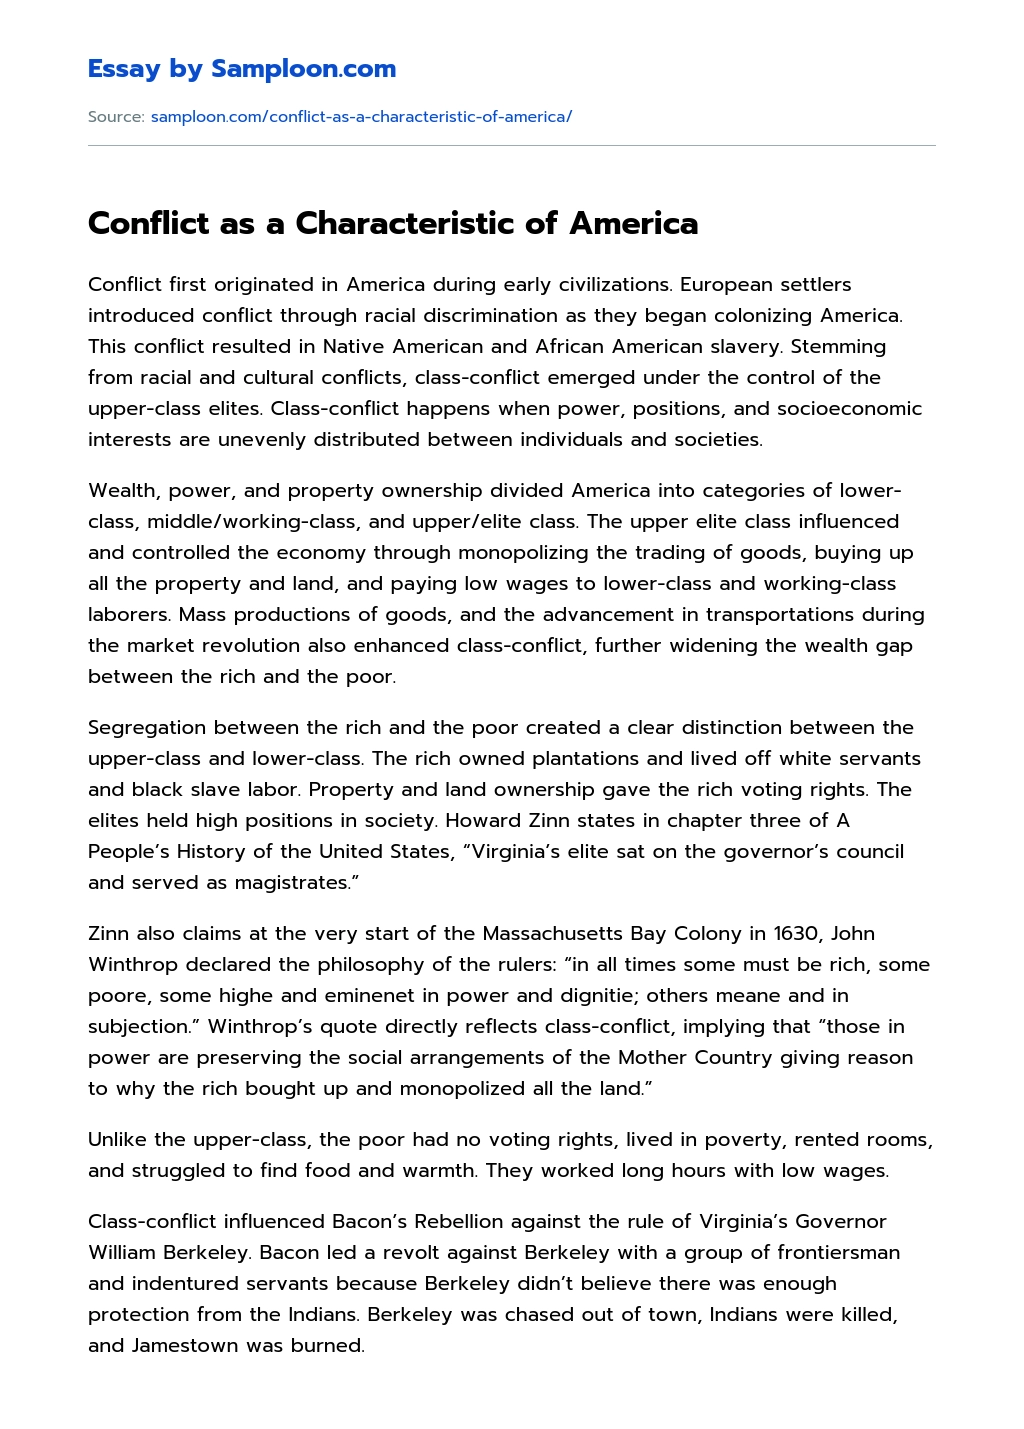 Conflict as a Characteristic of America essay